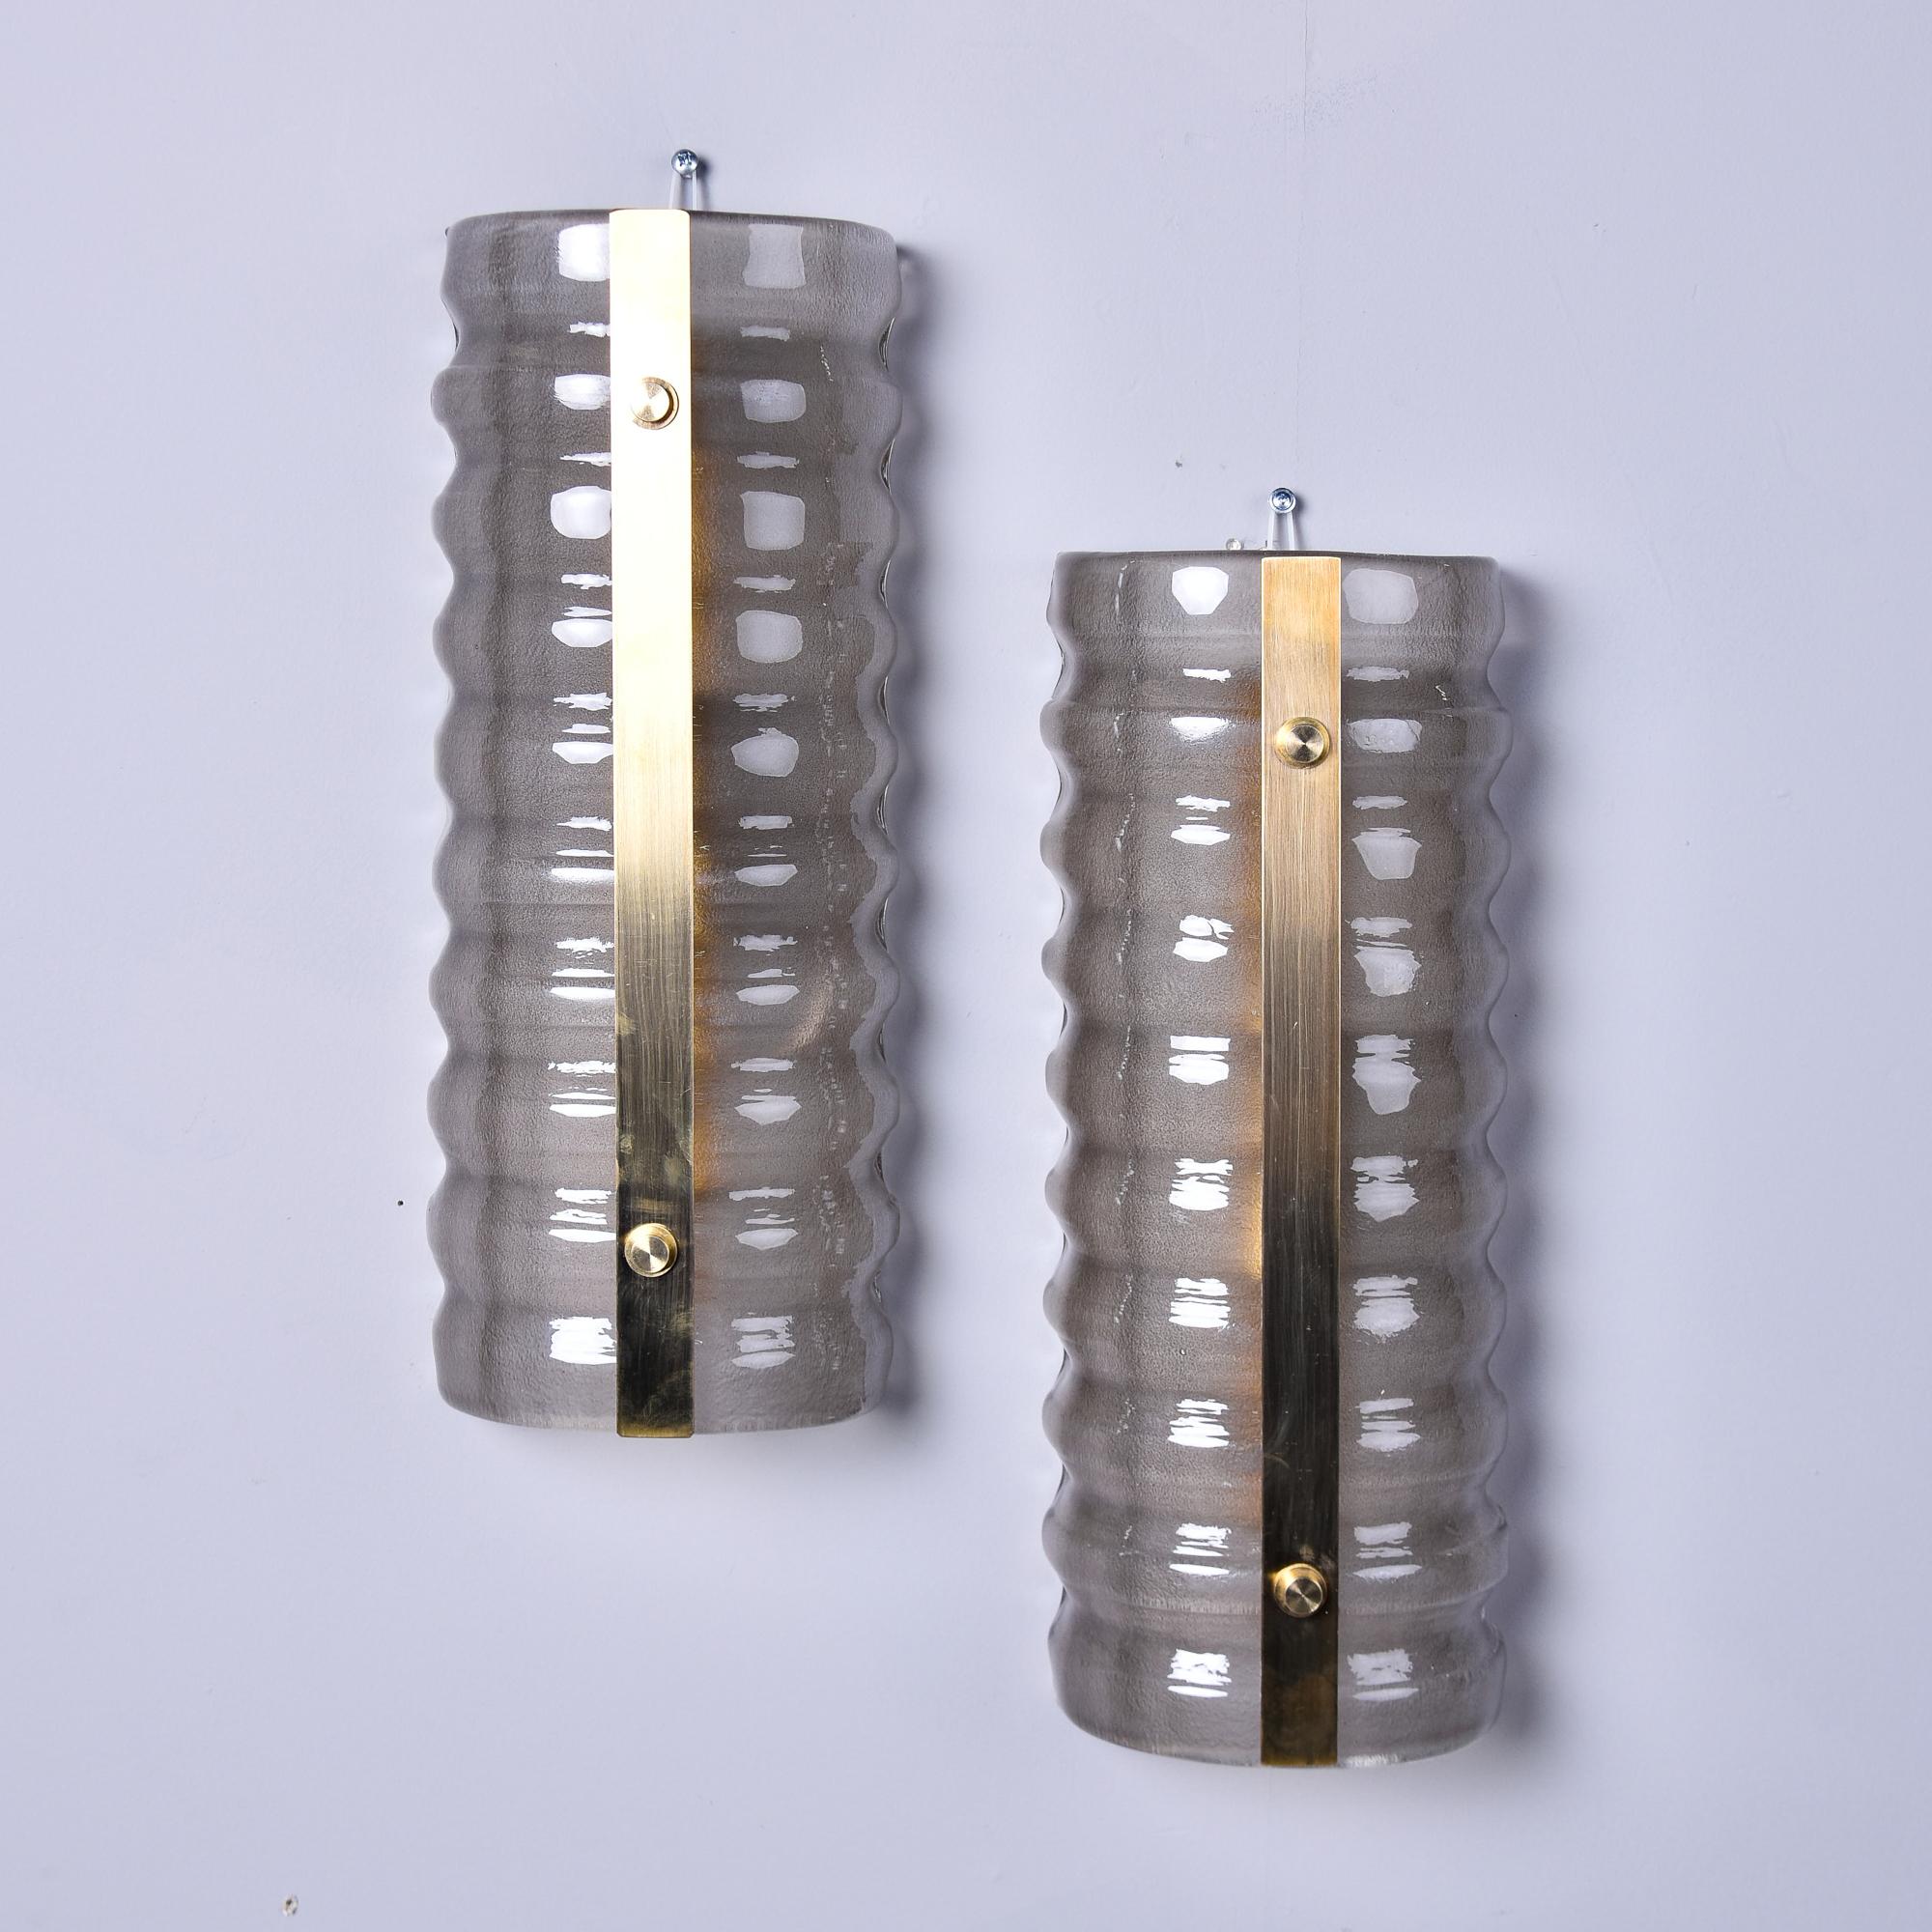 New pair of sconces made in Italy feature handmade Murano glass shades in a smokey taupe color. Each shade thickly ribbed surface and is accented with a vertical brass band.  Sconces each have two standard sized sockets and the electrical wiring has